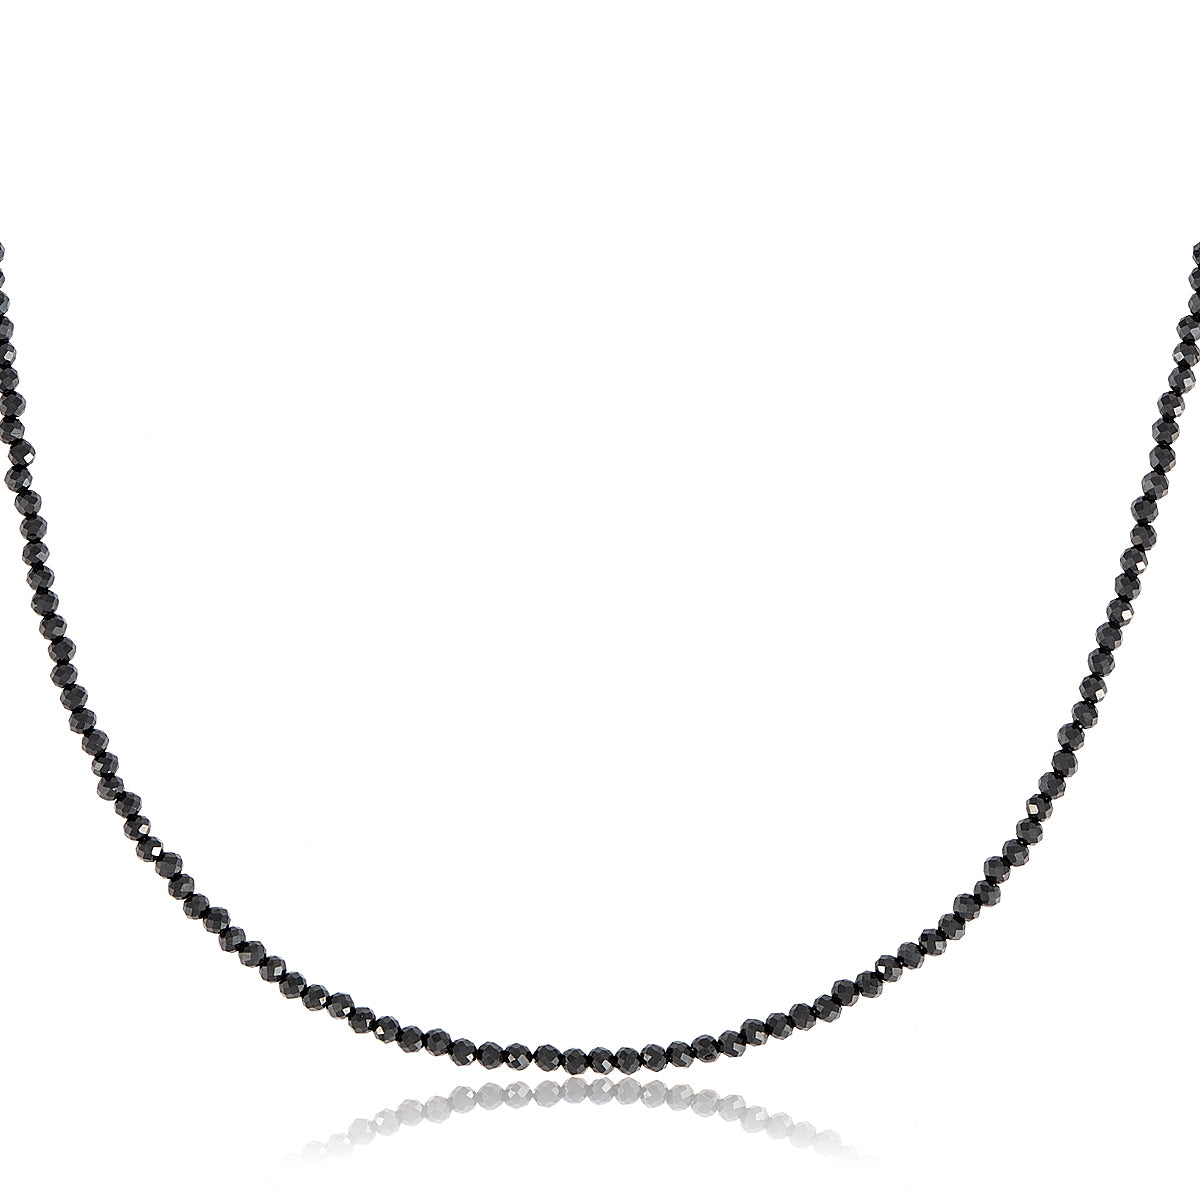 LONG BLACK SPINEL NECKLACE WITH SILVER CLASP